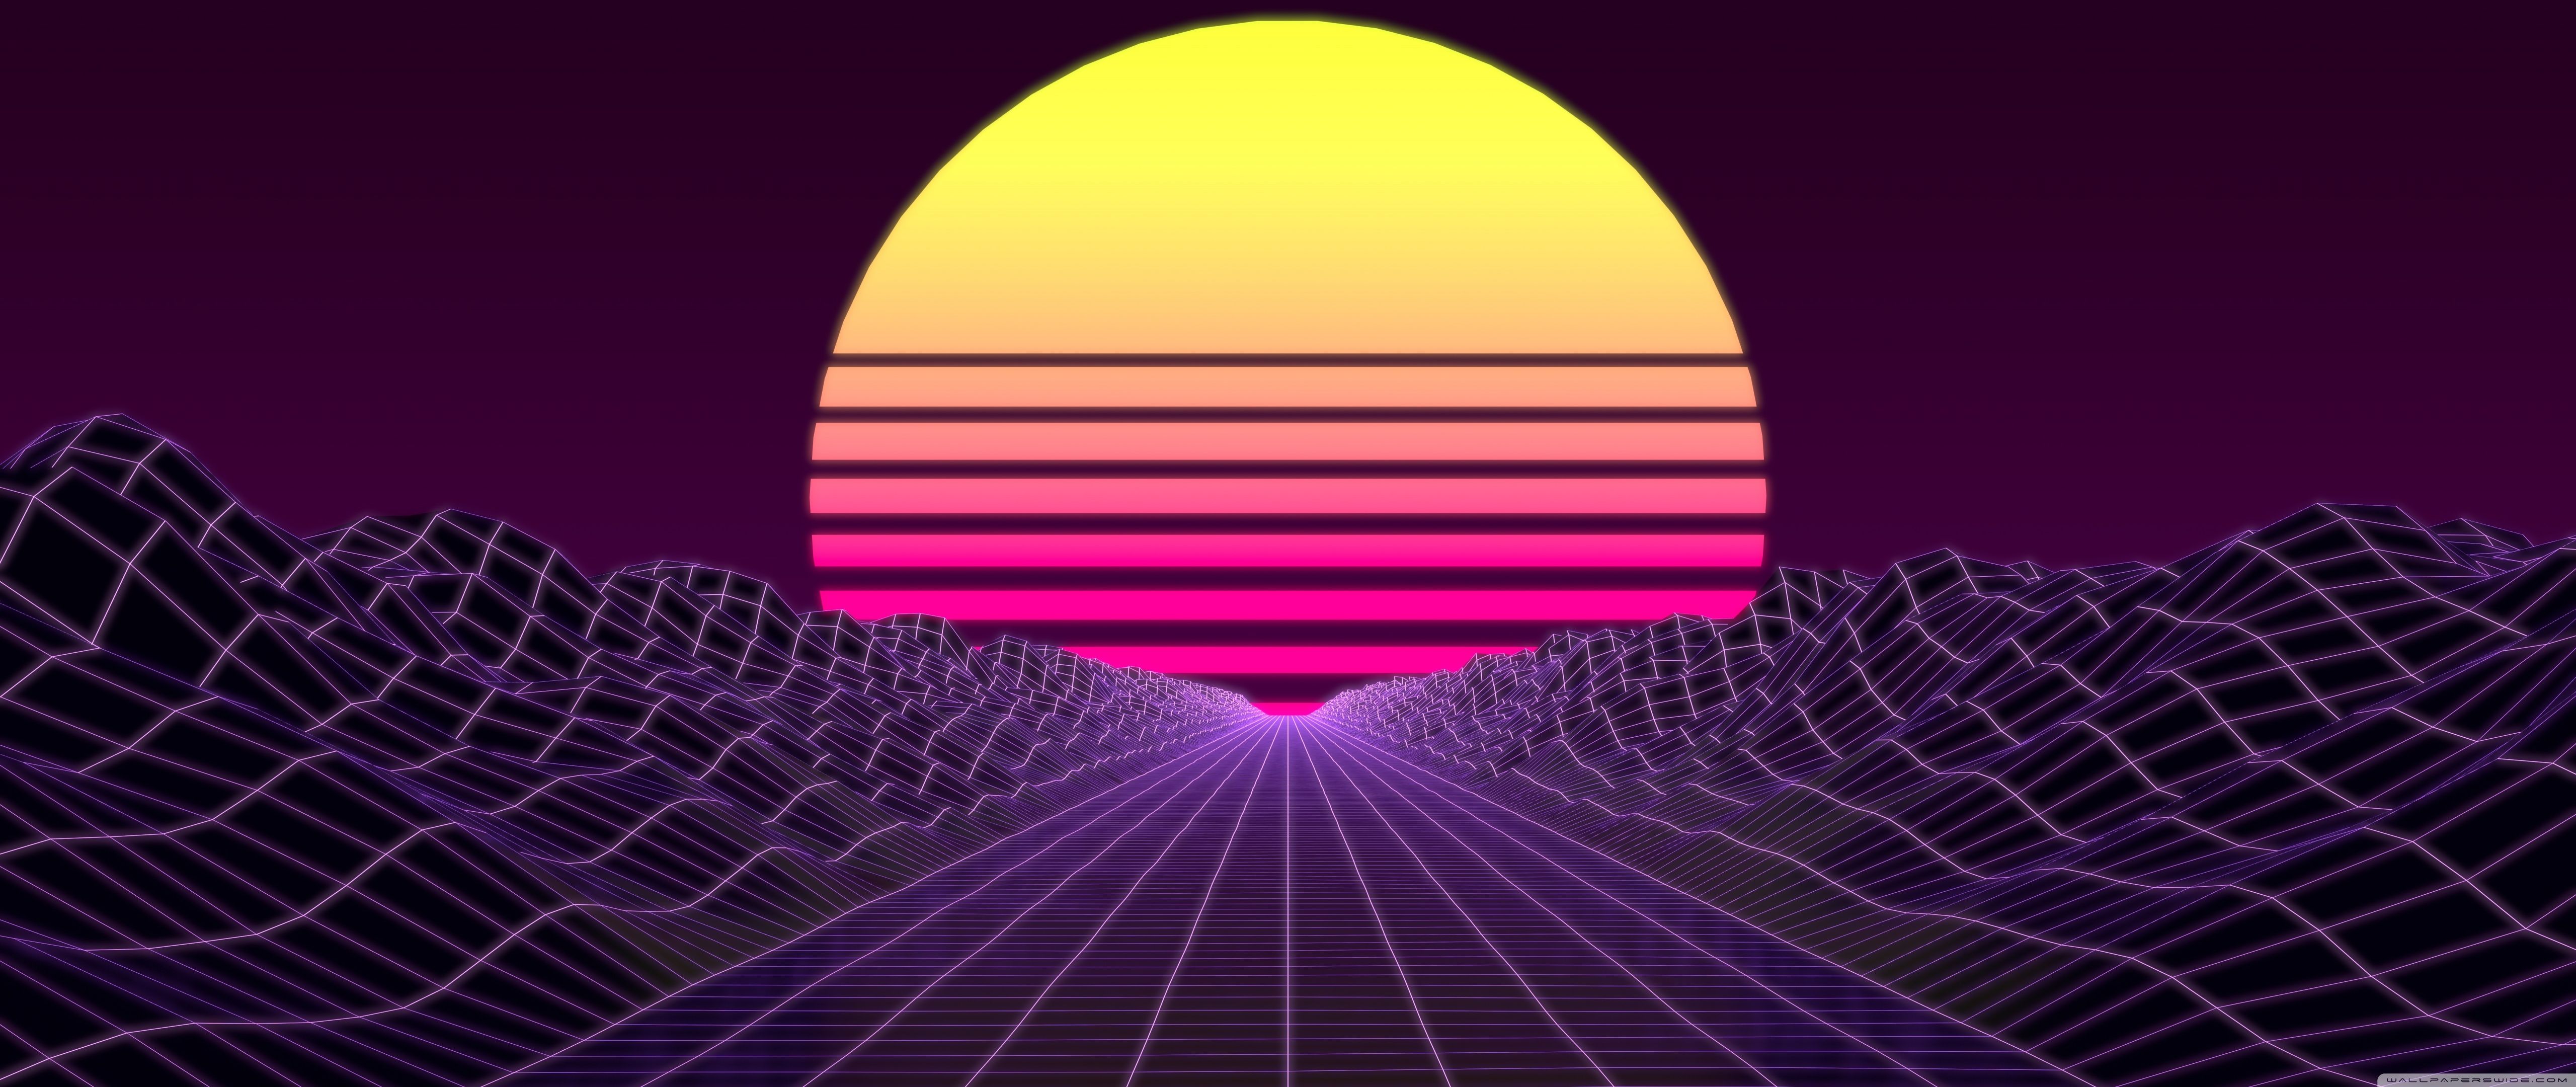 Synthwave Computer Wallpaper Free Synthwave Computer Background